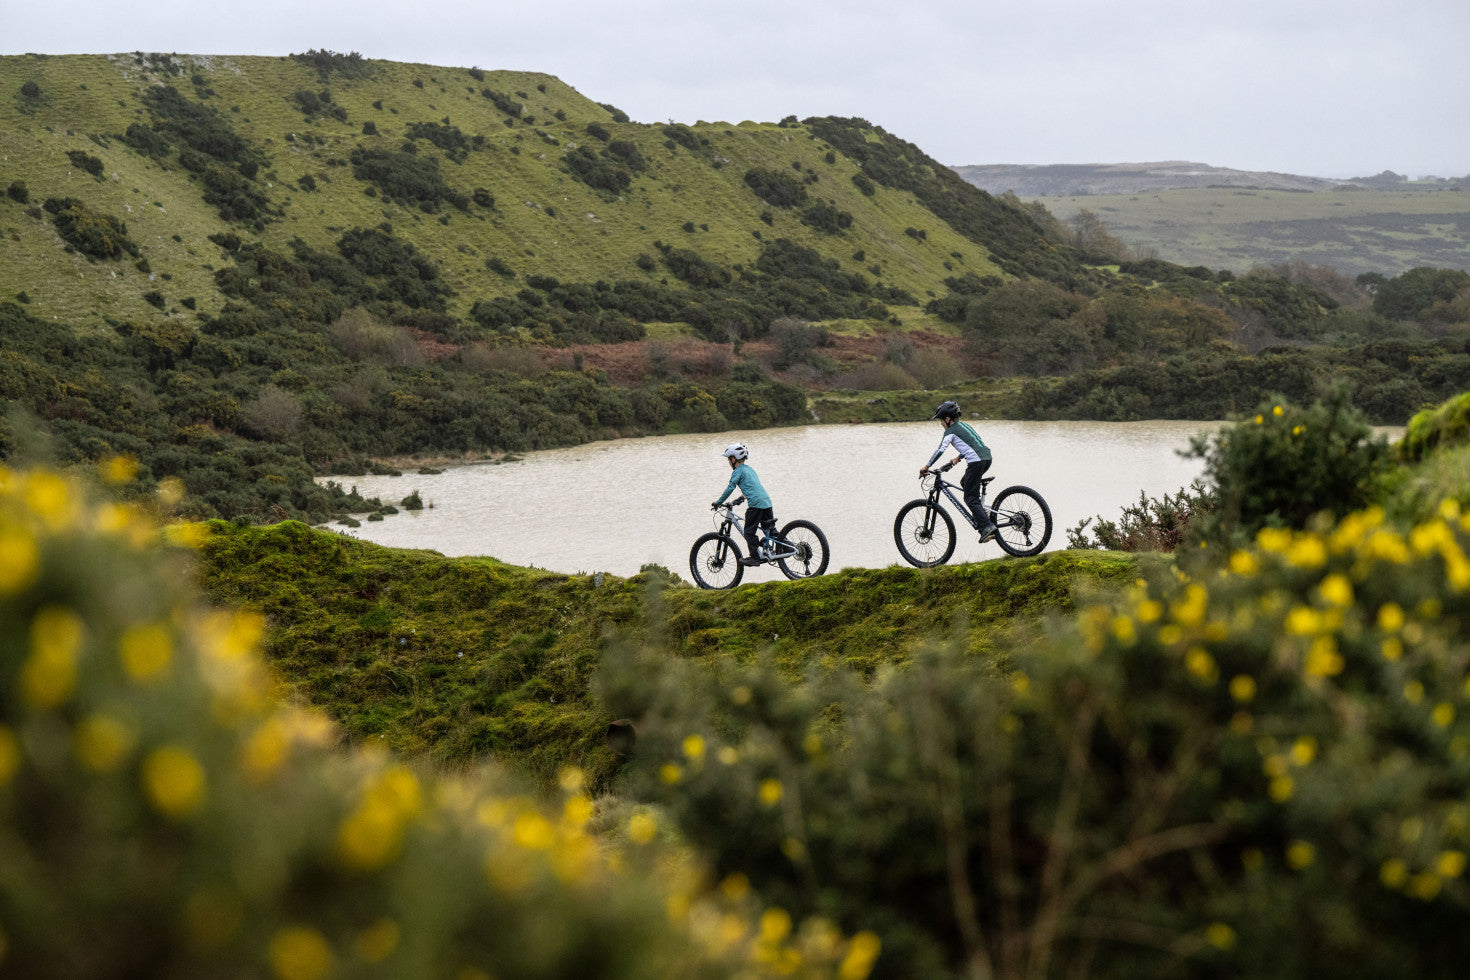 Mondraker F-Play 26 Children's eMTB Riding along the lakeside with surrounding green hills 